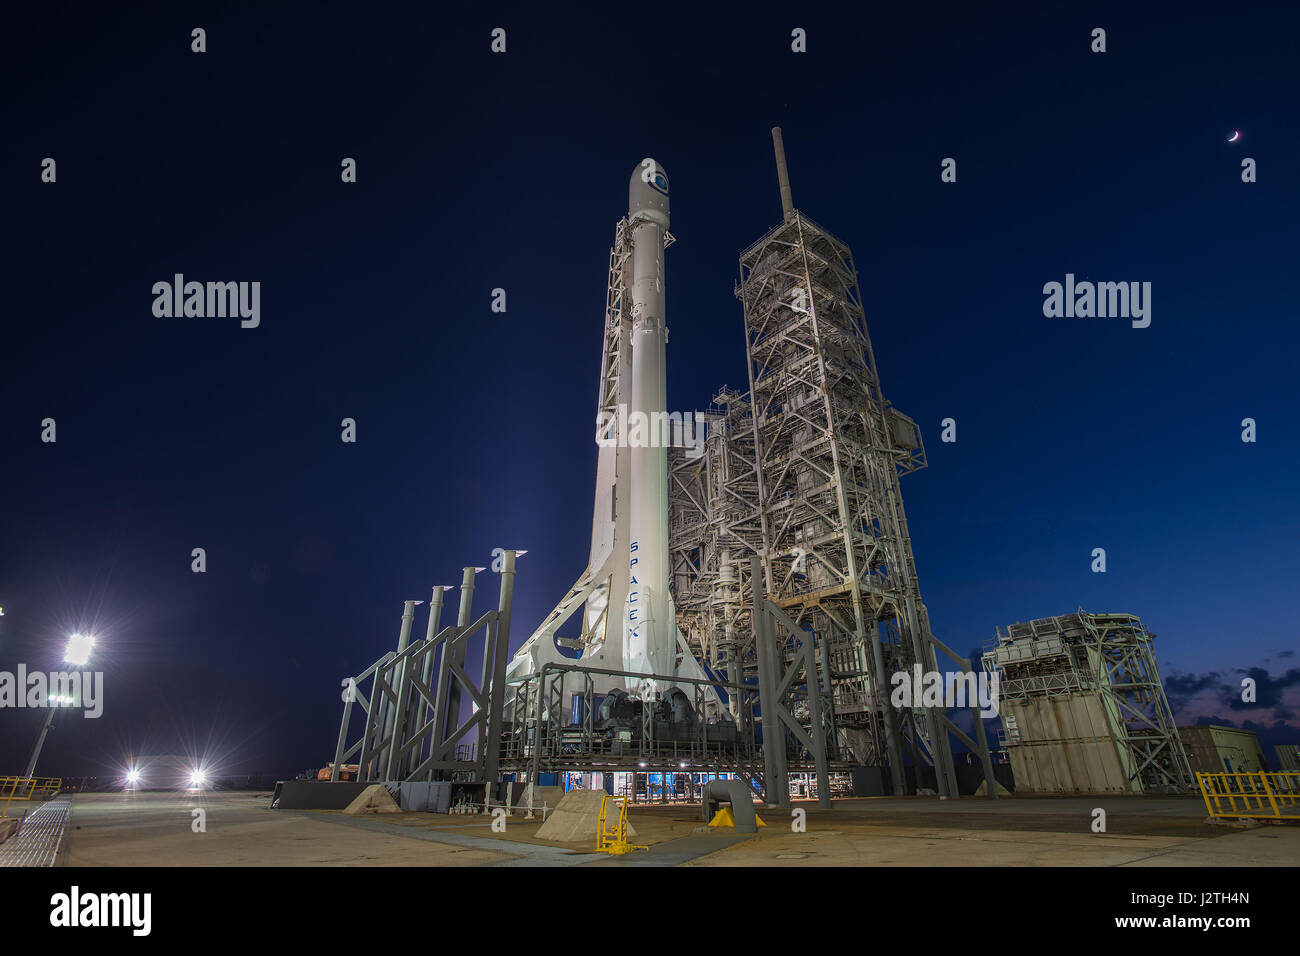 The SpaceX Falcon 9 rocket carrying a classified military satellite sits on Launch Complex 39A ready for blast off at the Kennedy Space Center late April 29, 2017 in Cape Canaveral, Florida. The SpaceX mission was scrubbed at the last minute due to a faulty sensor and will try again on May 1st. Stock Photo